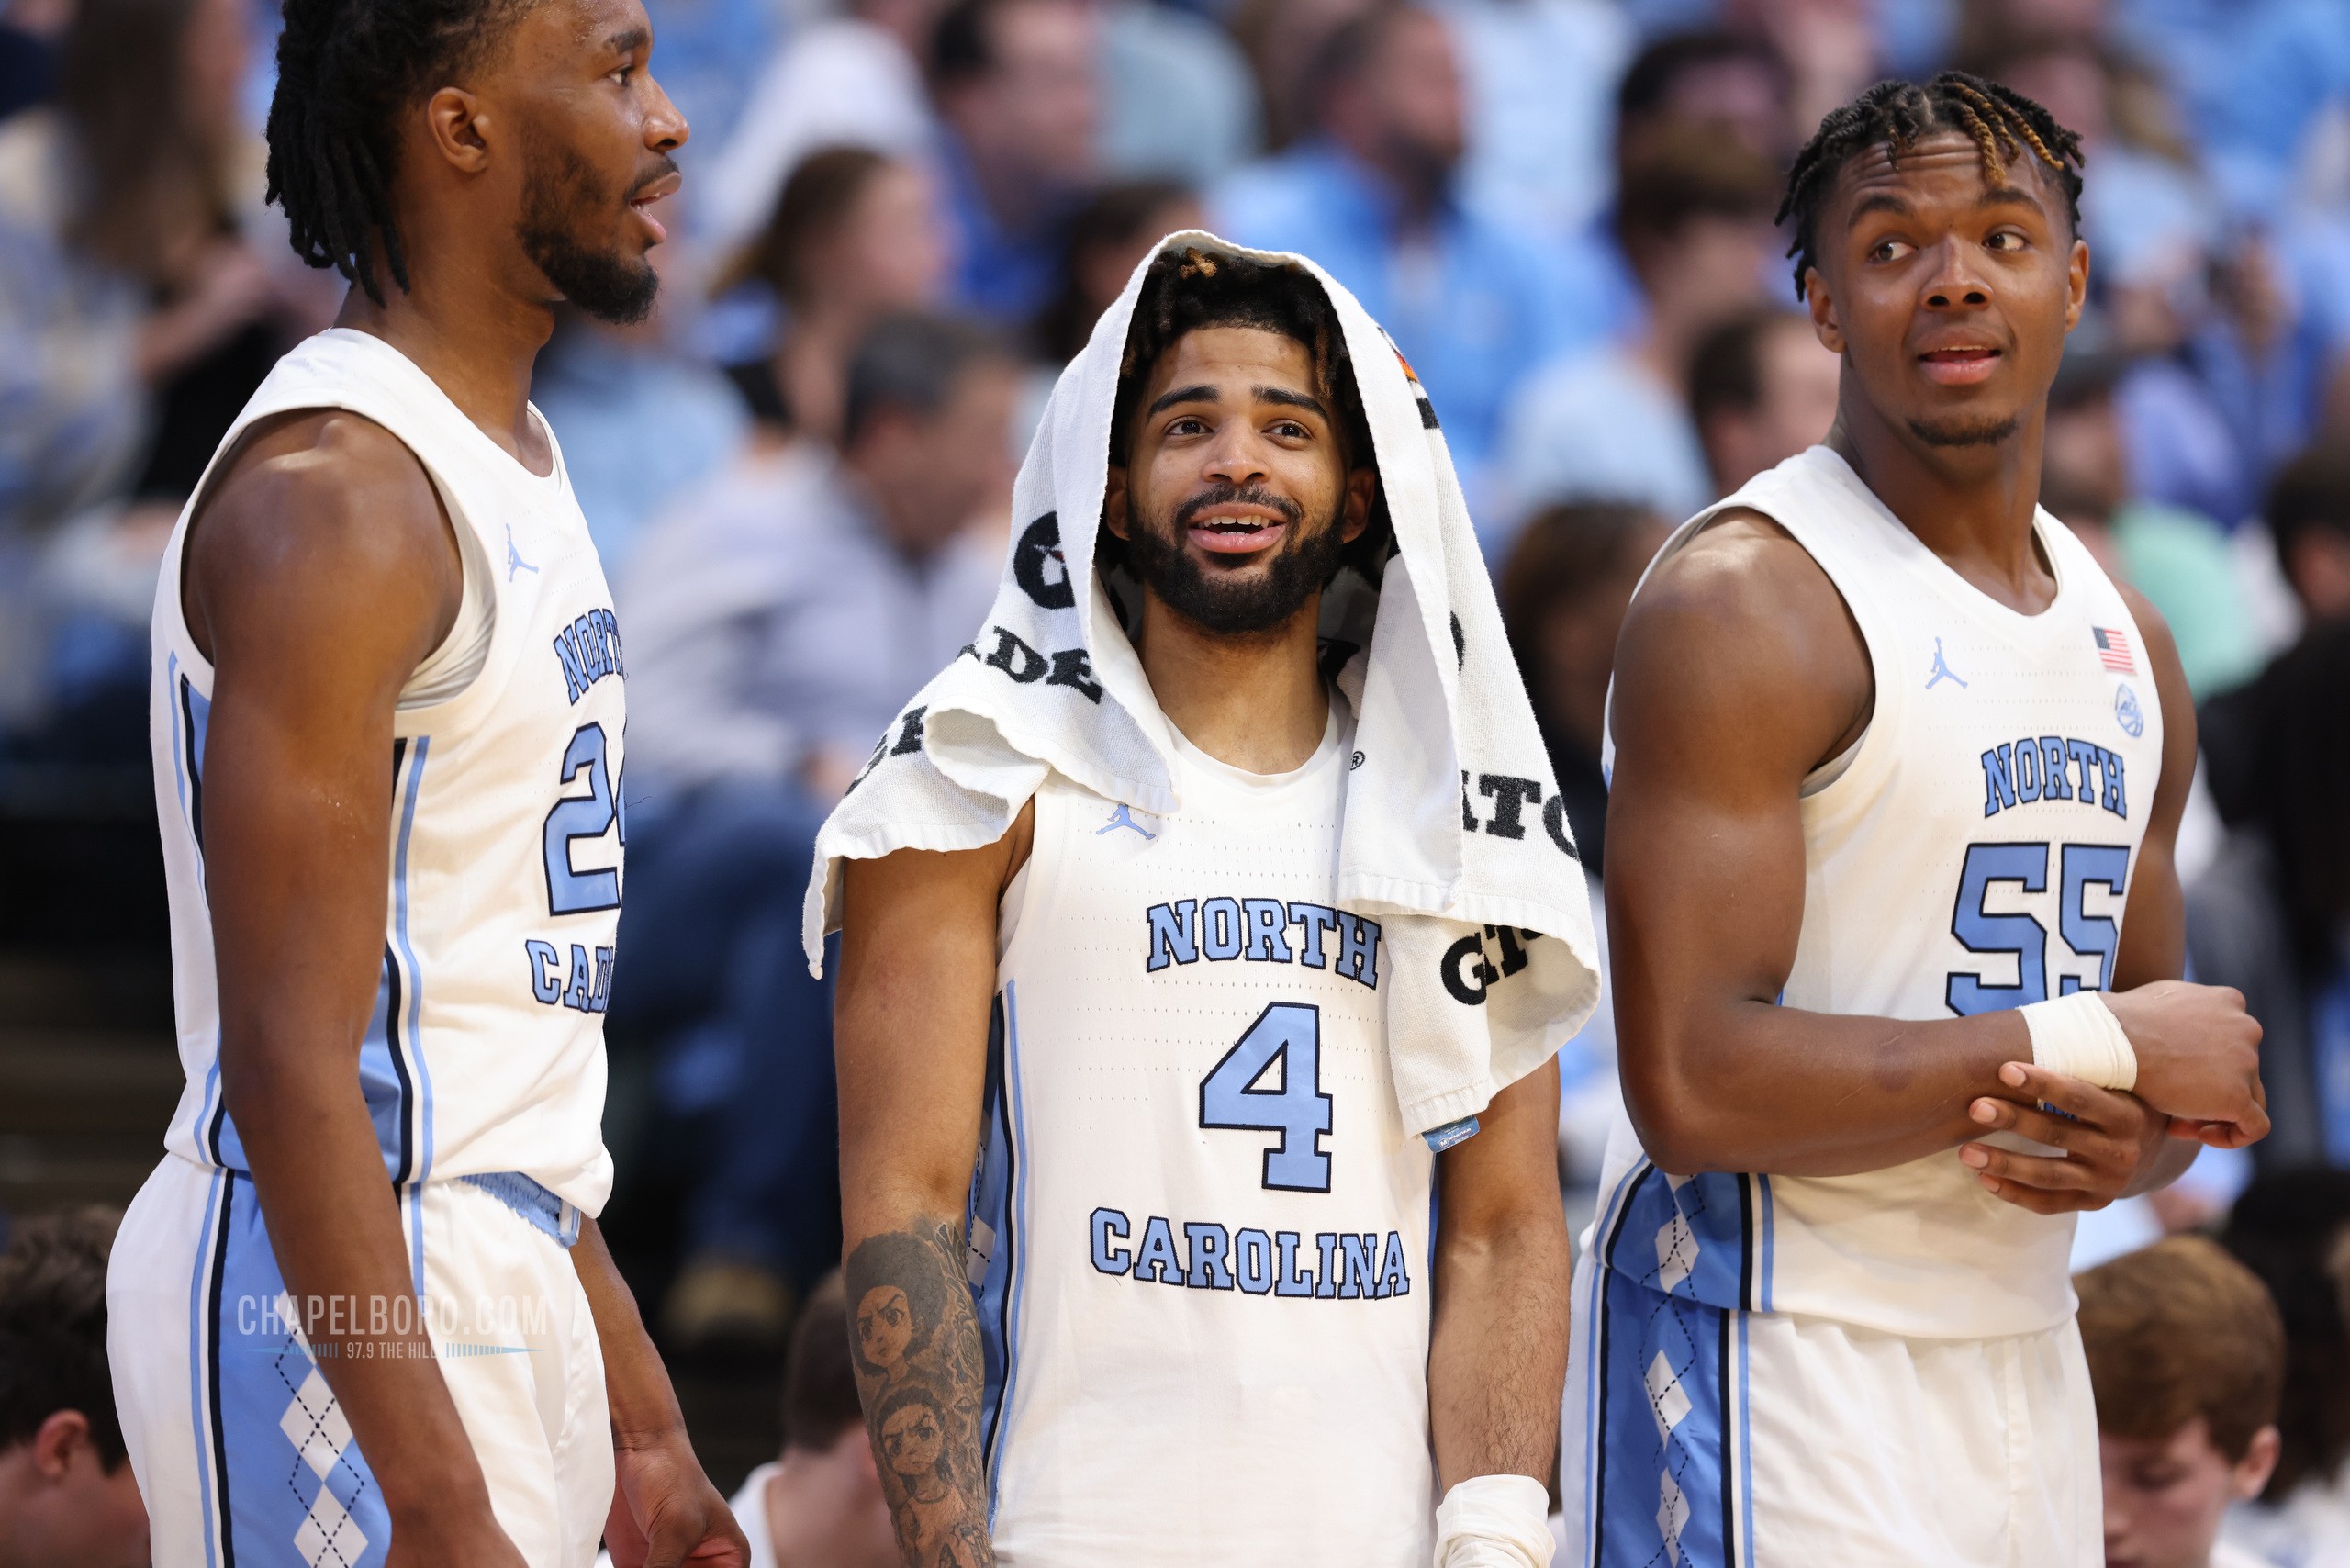 UNC Men’s Basketball at Pitt: How to Watch, Streaming Options, Tipoff Time